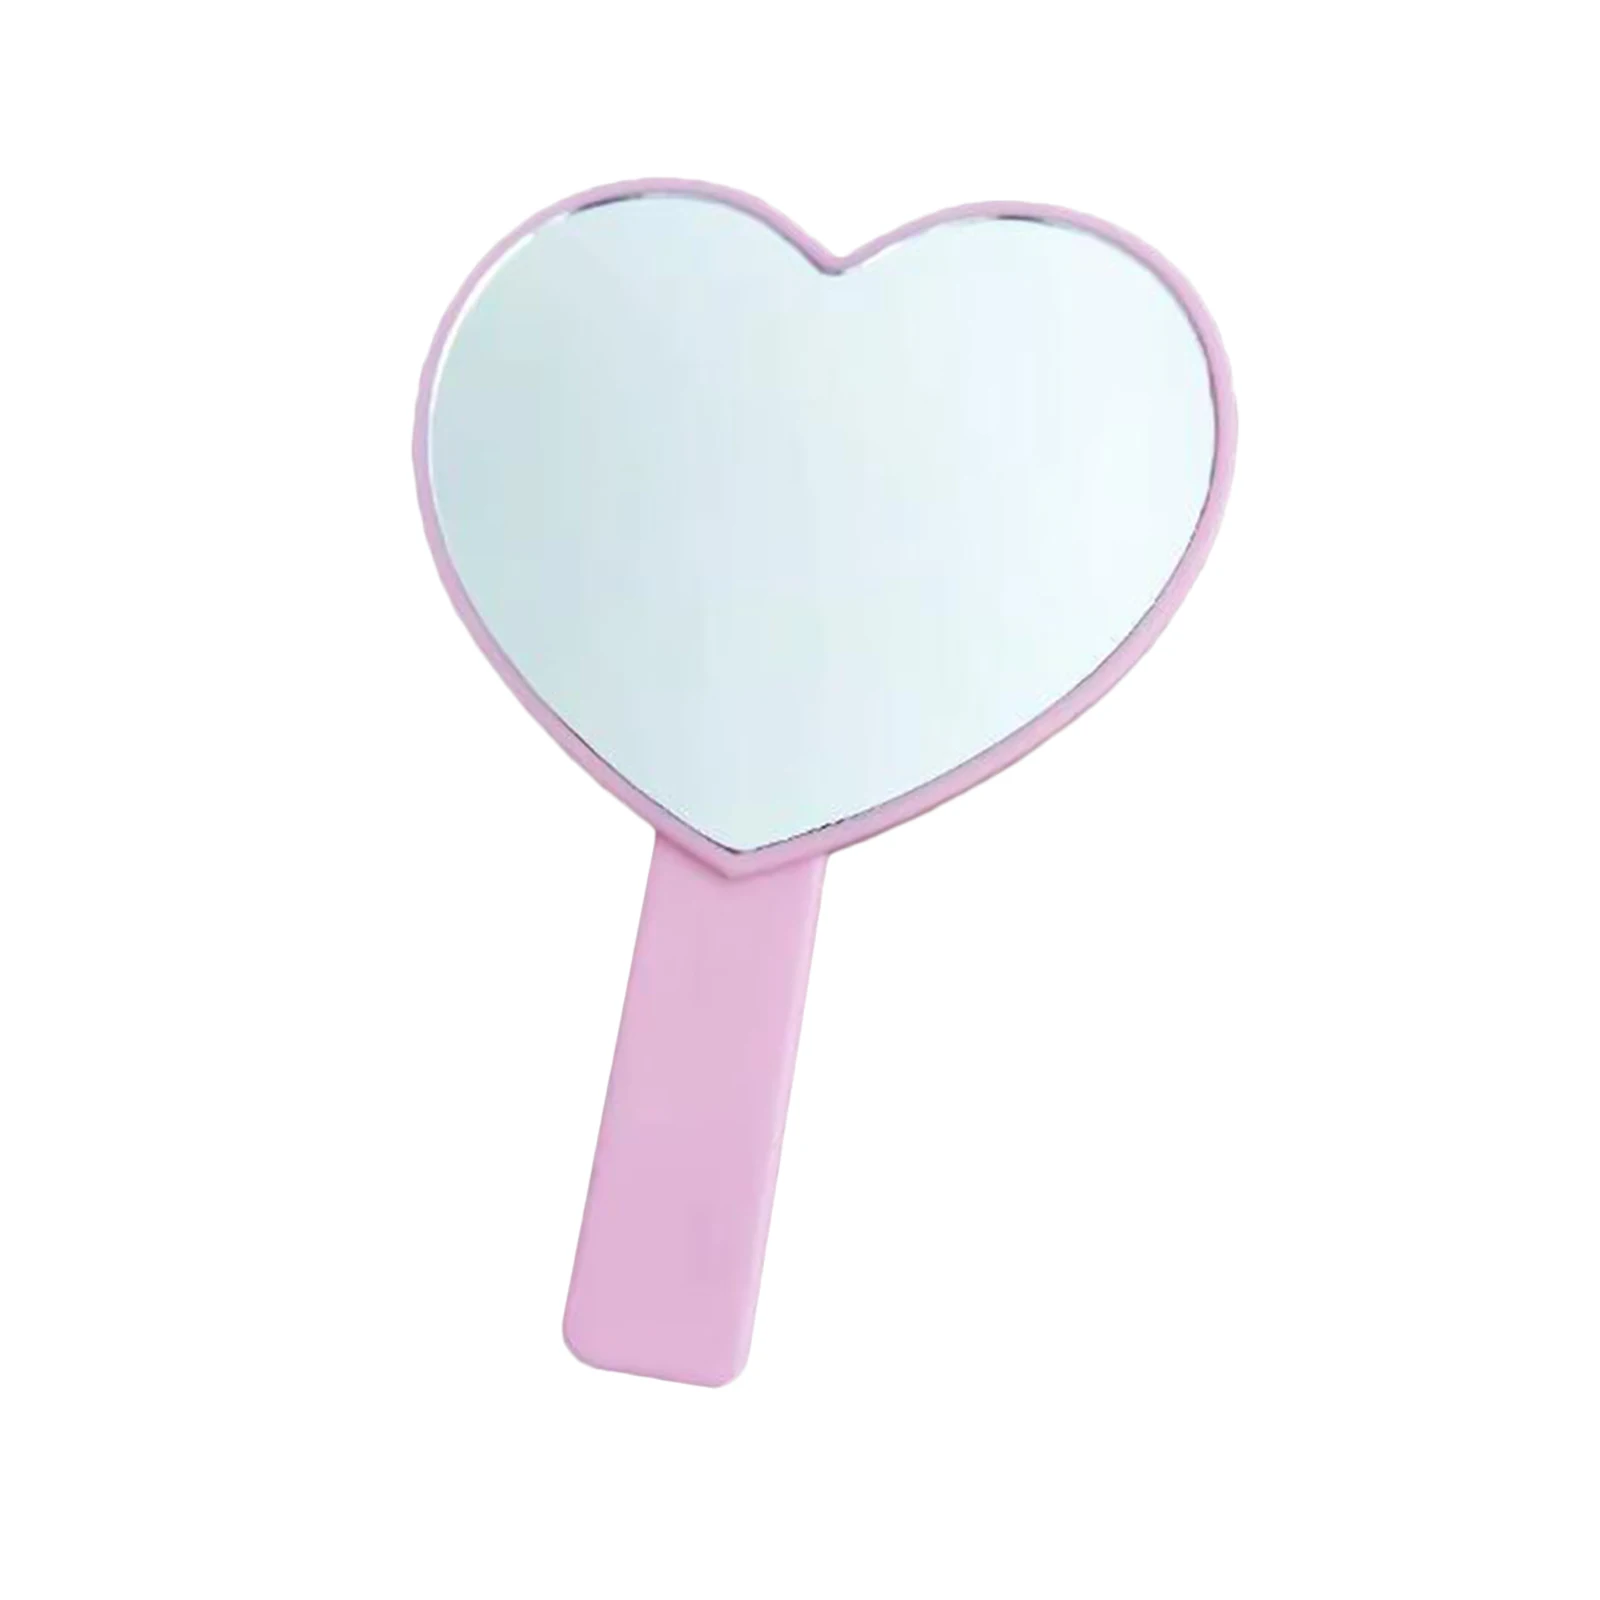 Portable Cute Heart Shaped Mirror Cosmetic Single Side Look Adorable Design